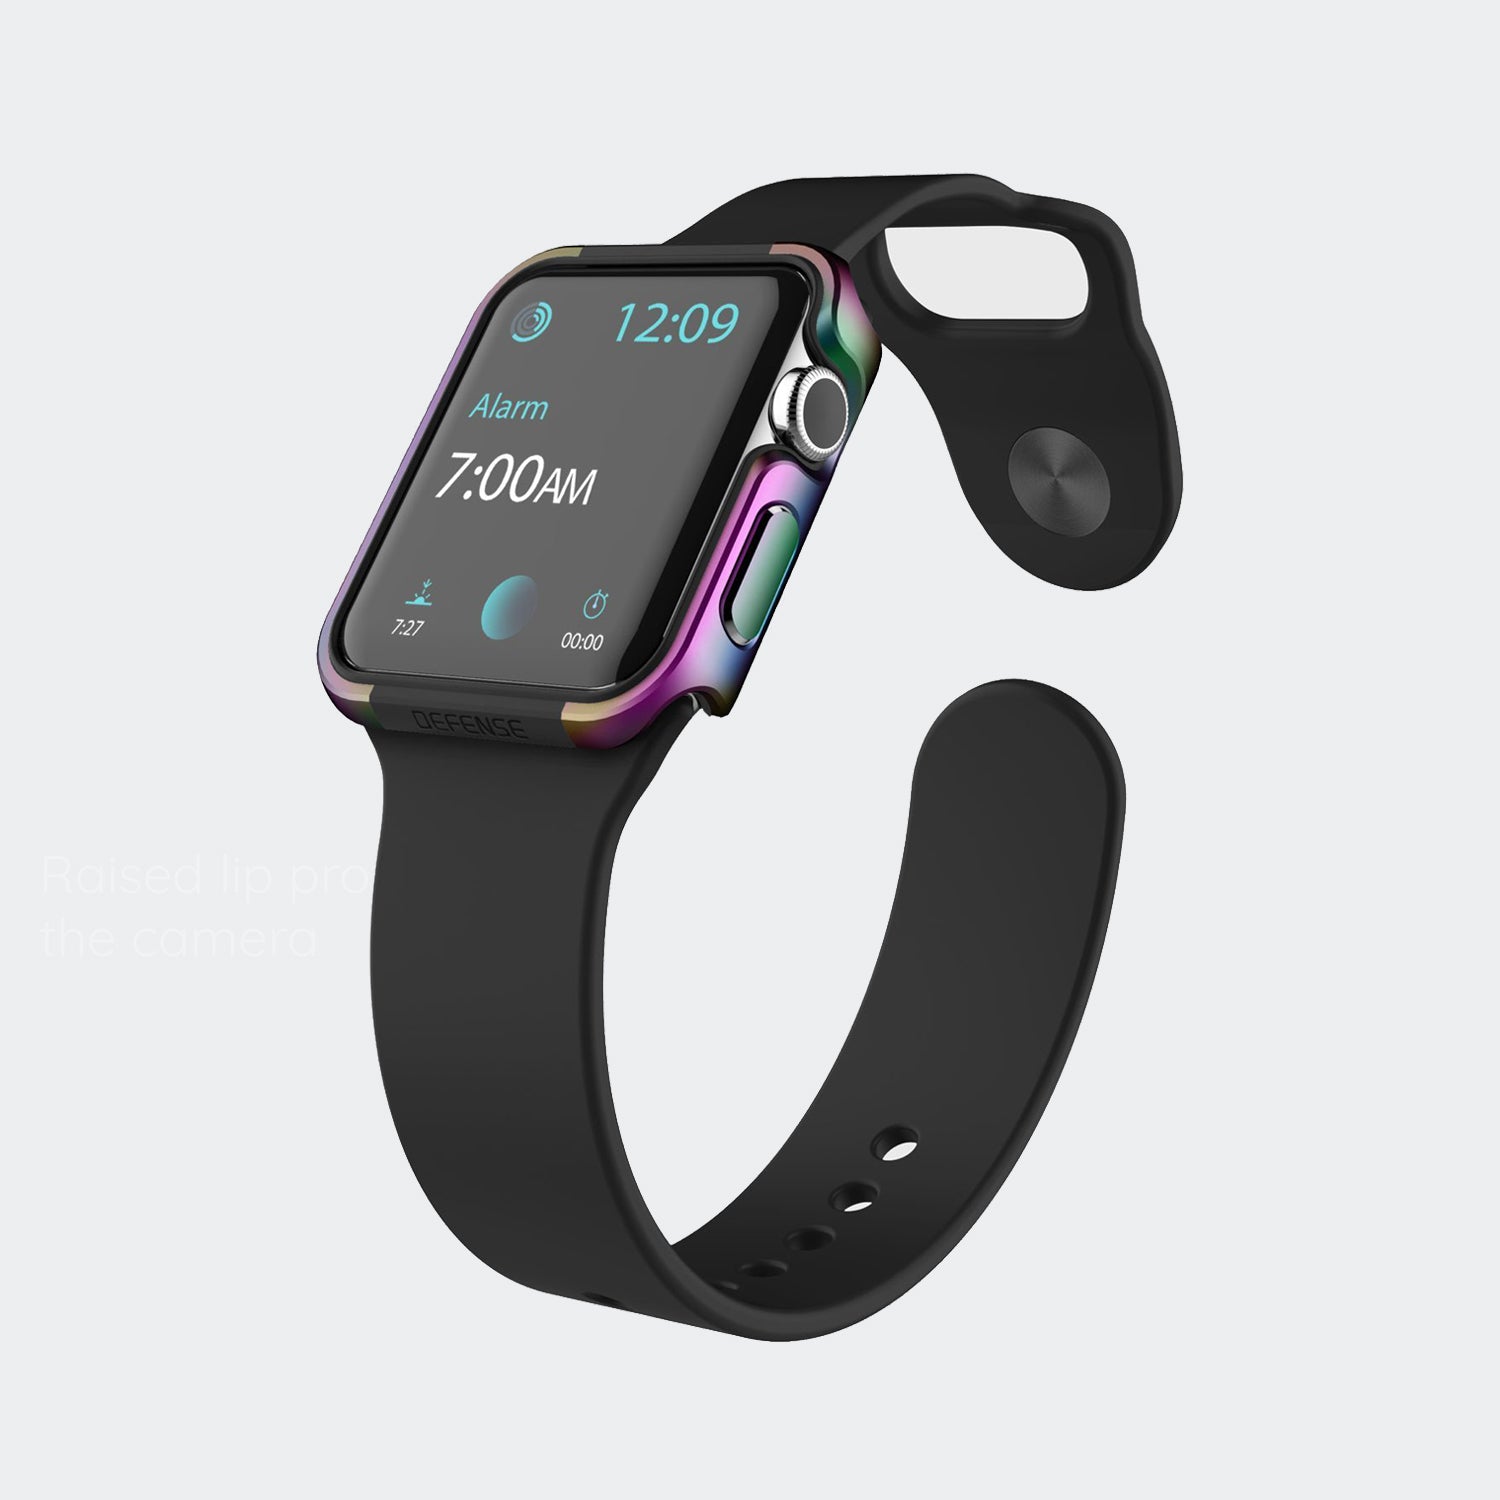 A Raptic Apple Watch 42mm Case - EDGE with a rainbow colored band that protects it.